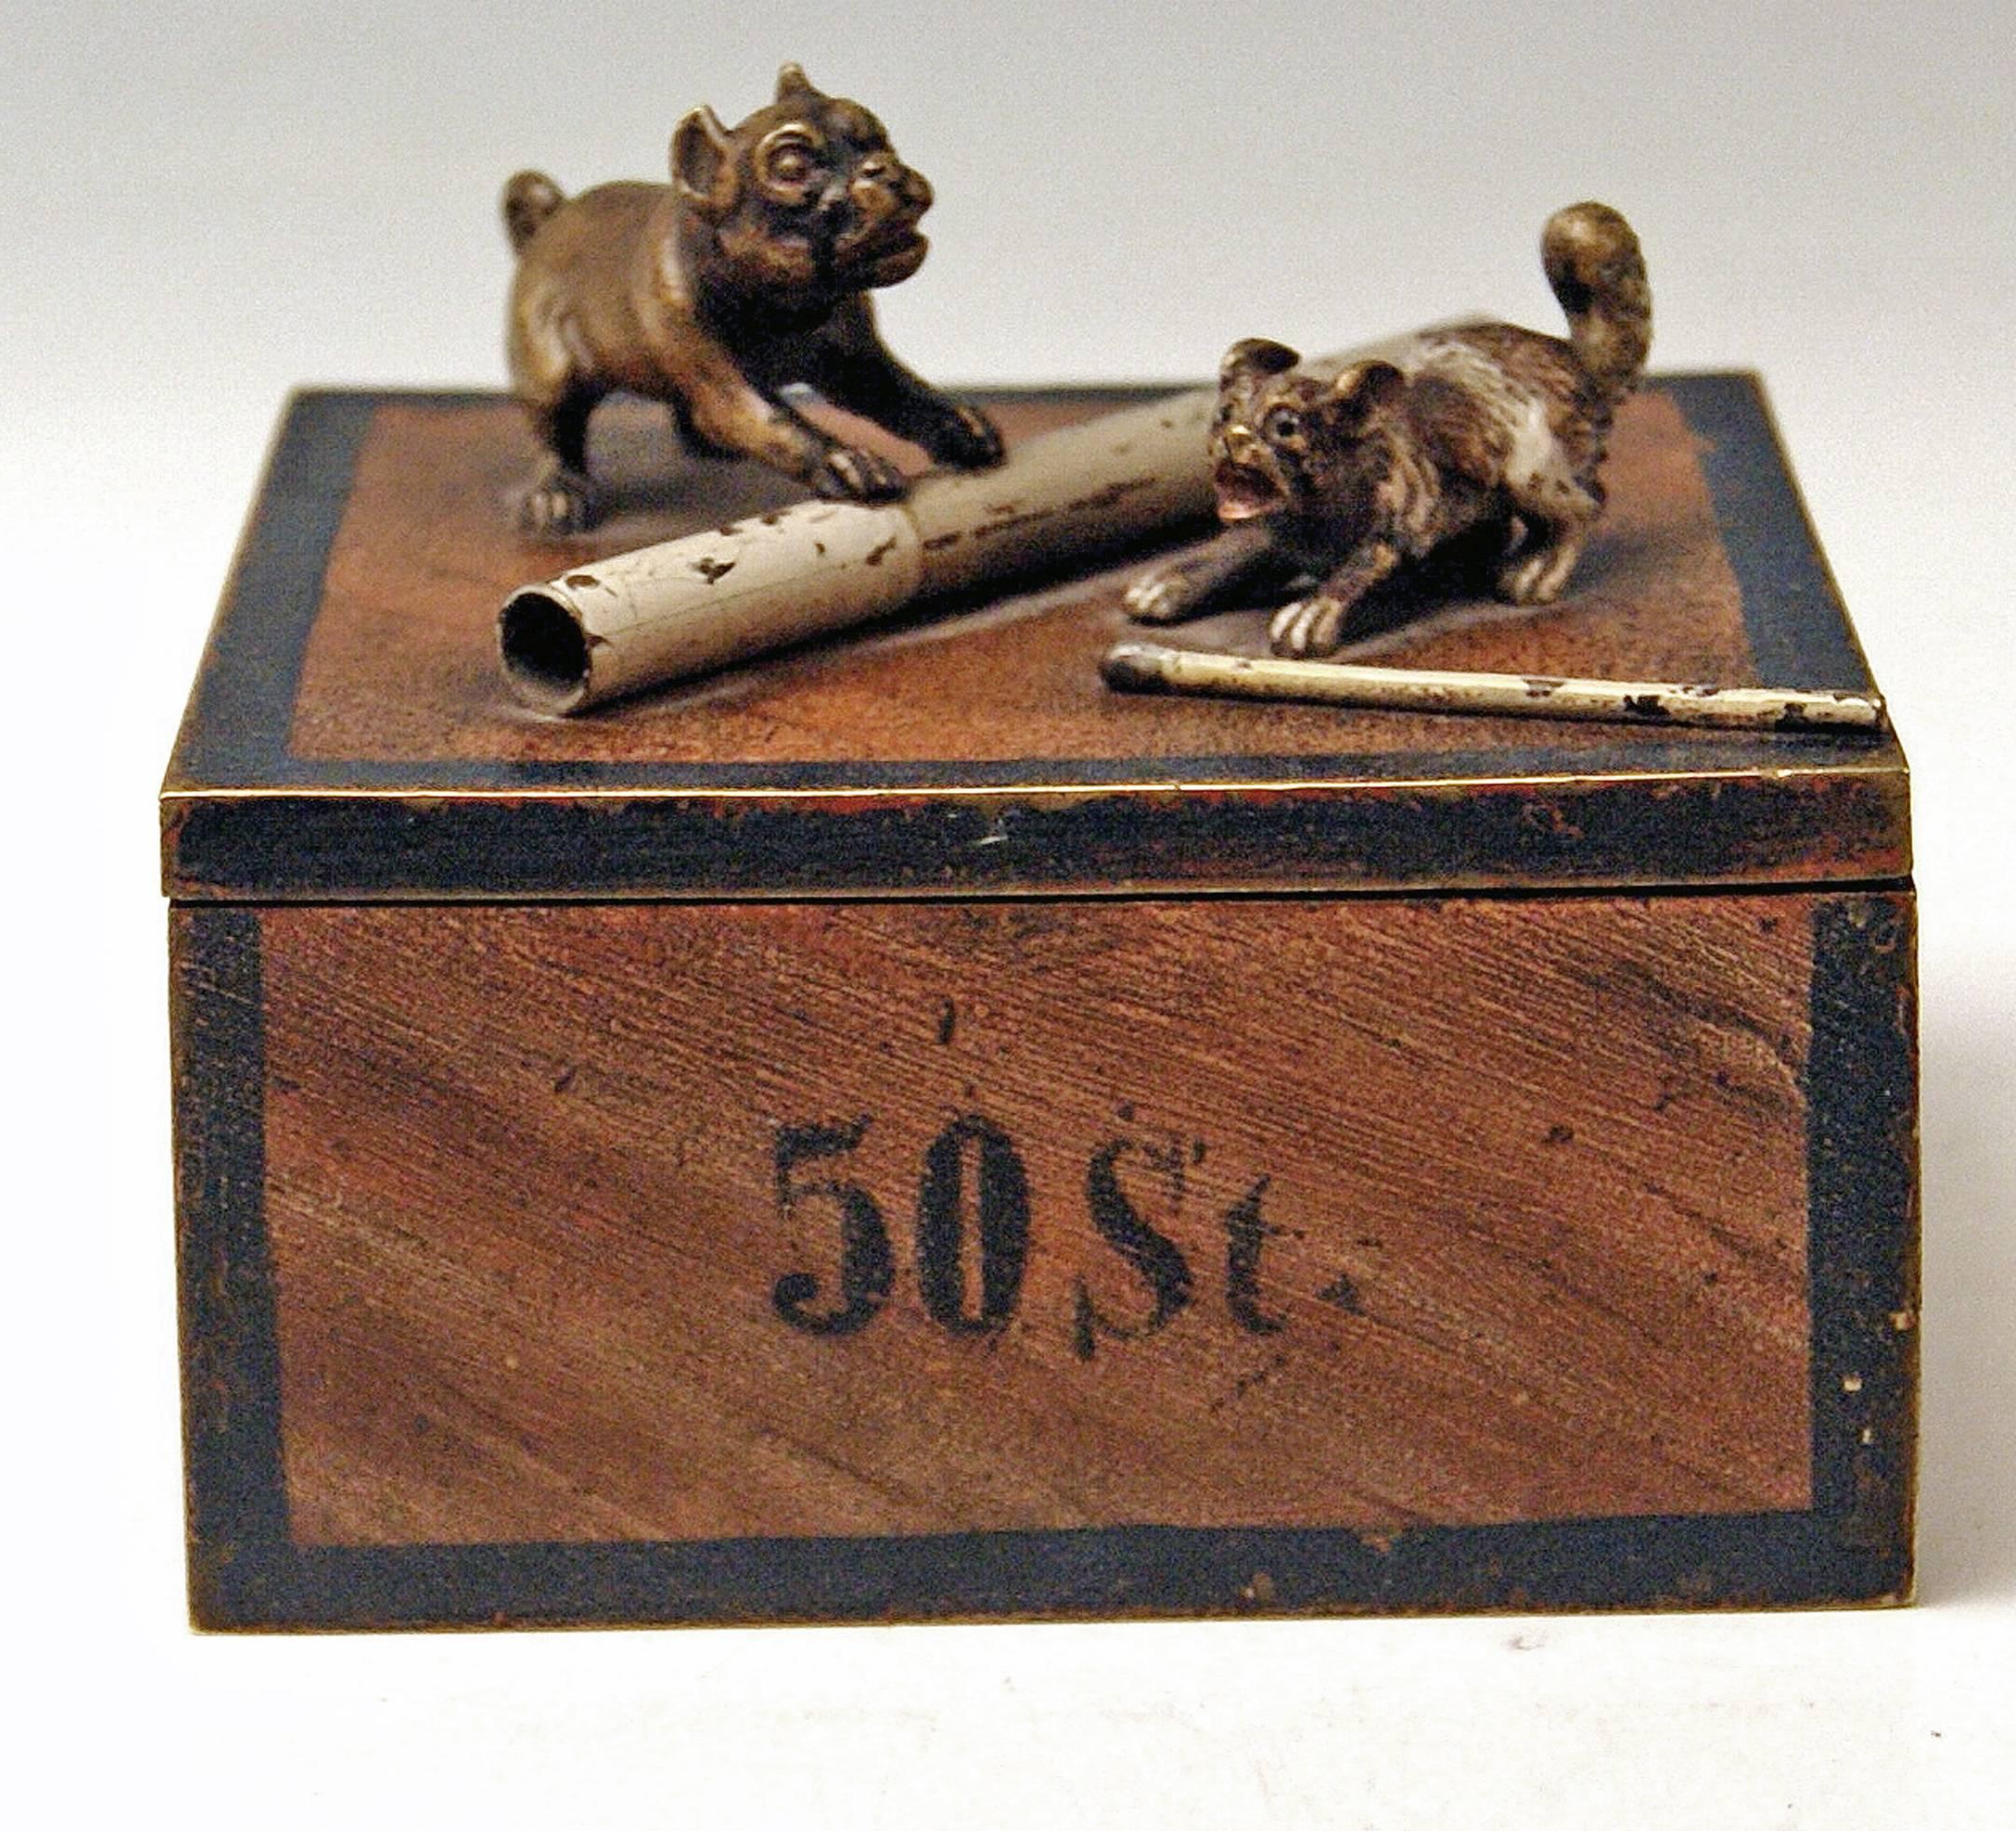 Painted Vienna Bronze Tobacco Box with Dogs Pugs by Franz Bergman'n', circa 1890-1900